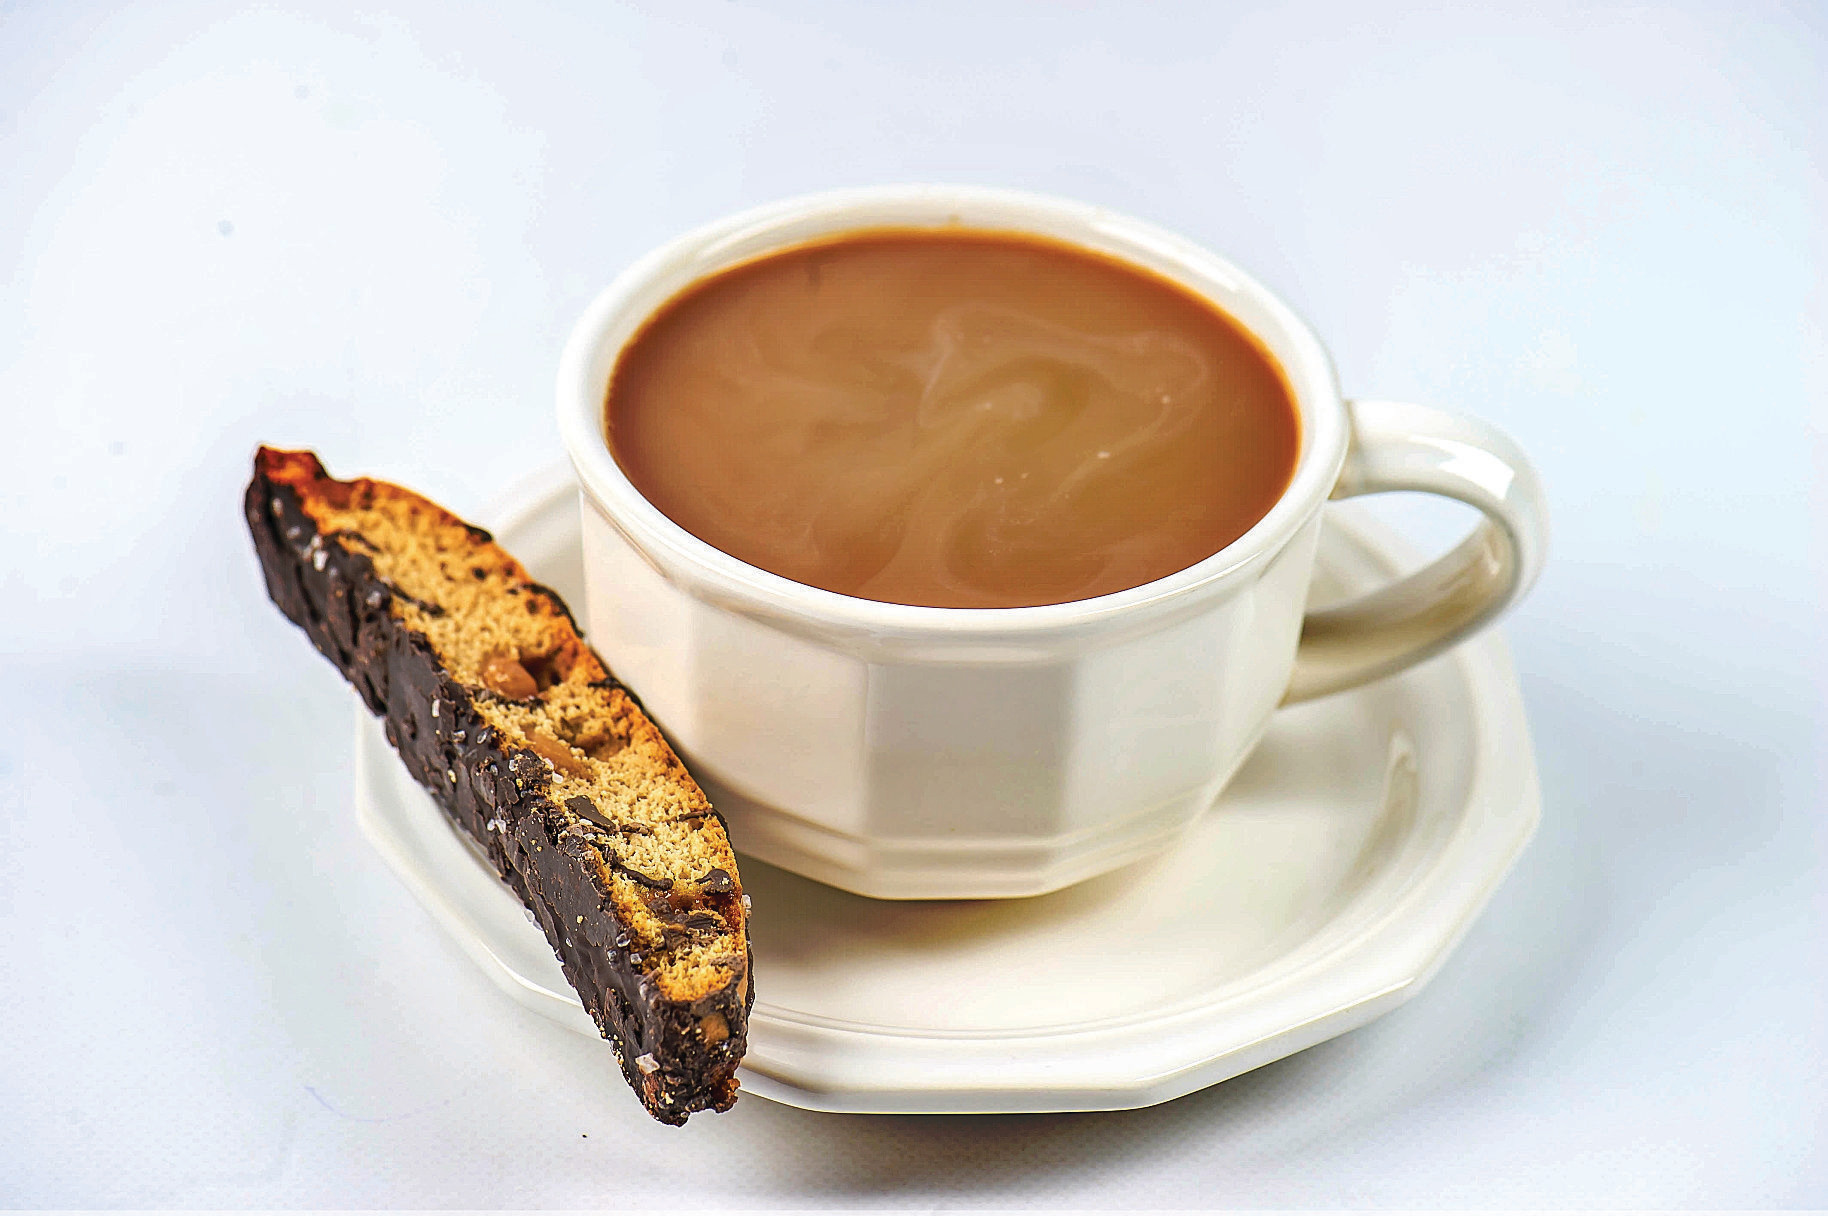 “Bake your own delicious, dunkable biscotti” The Berkshire Eagle